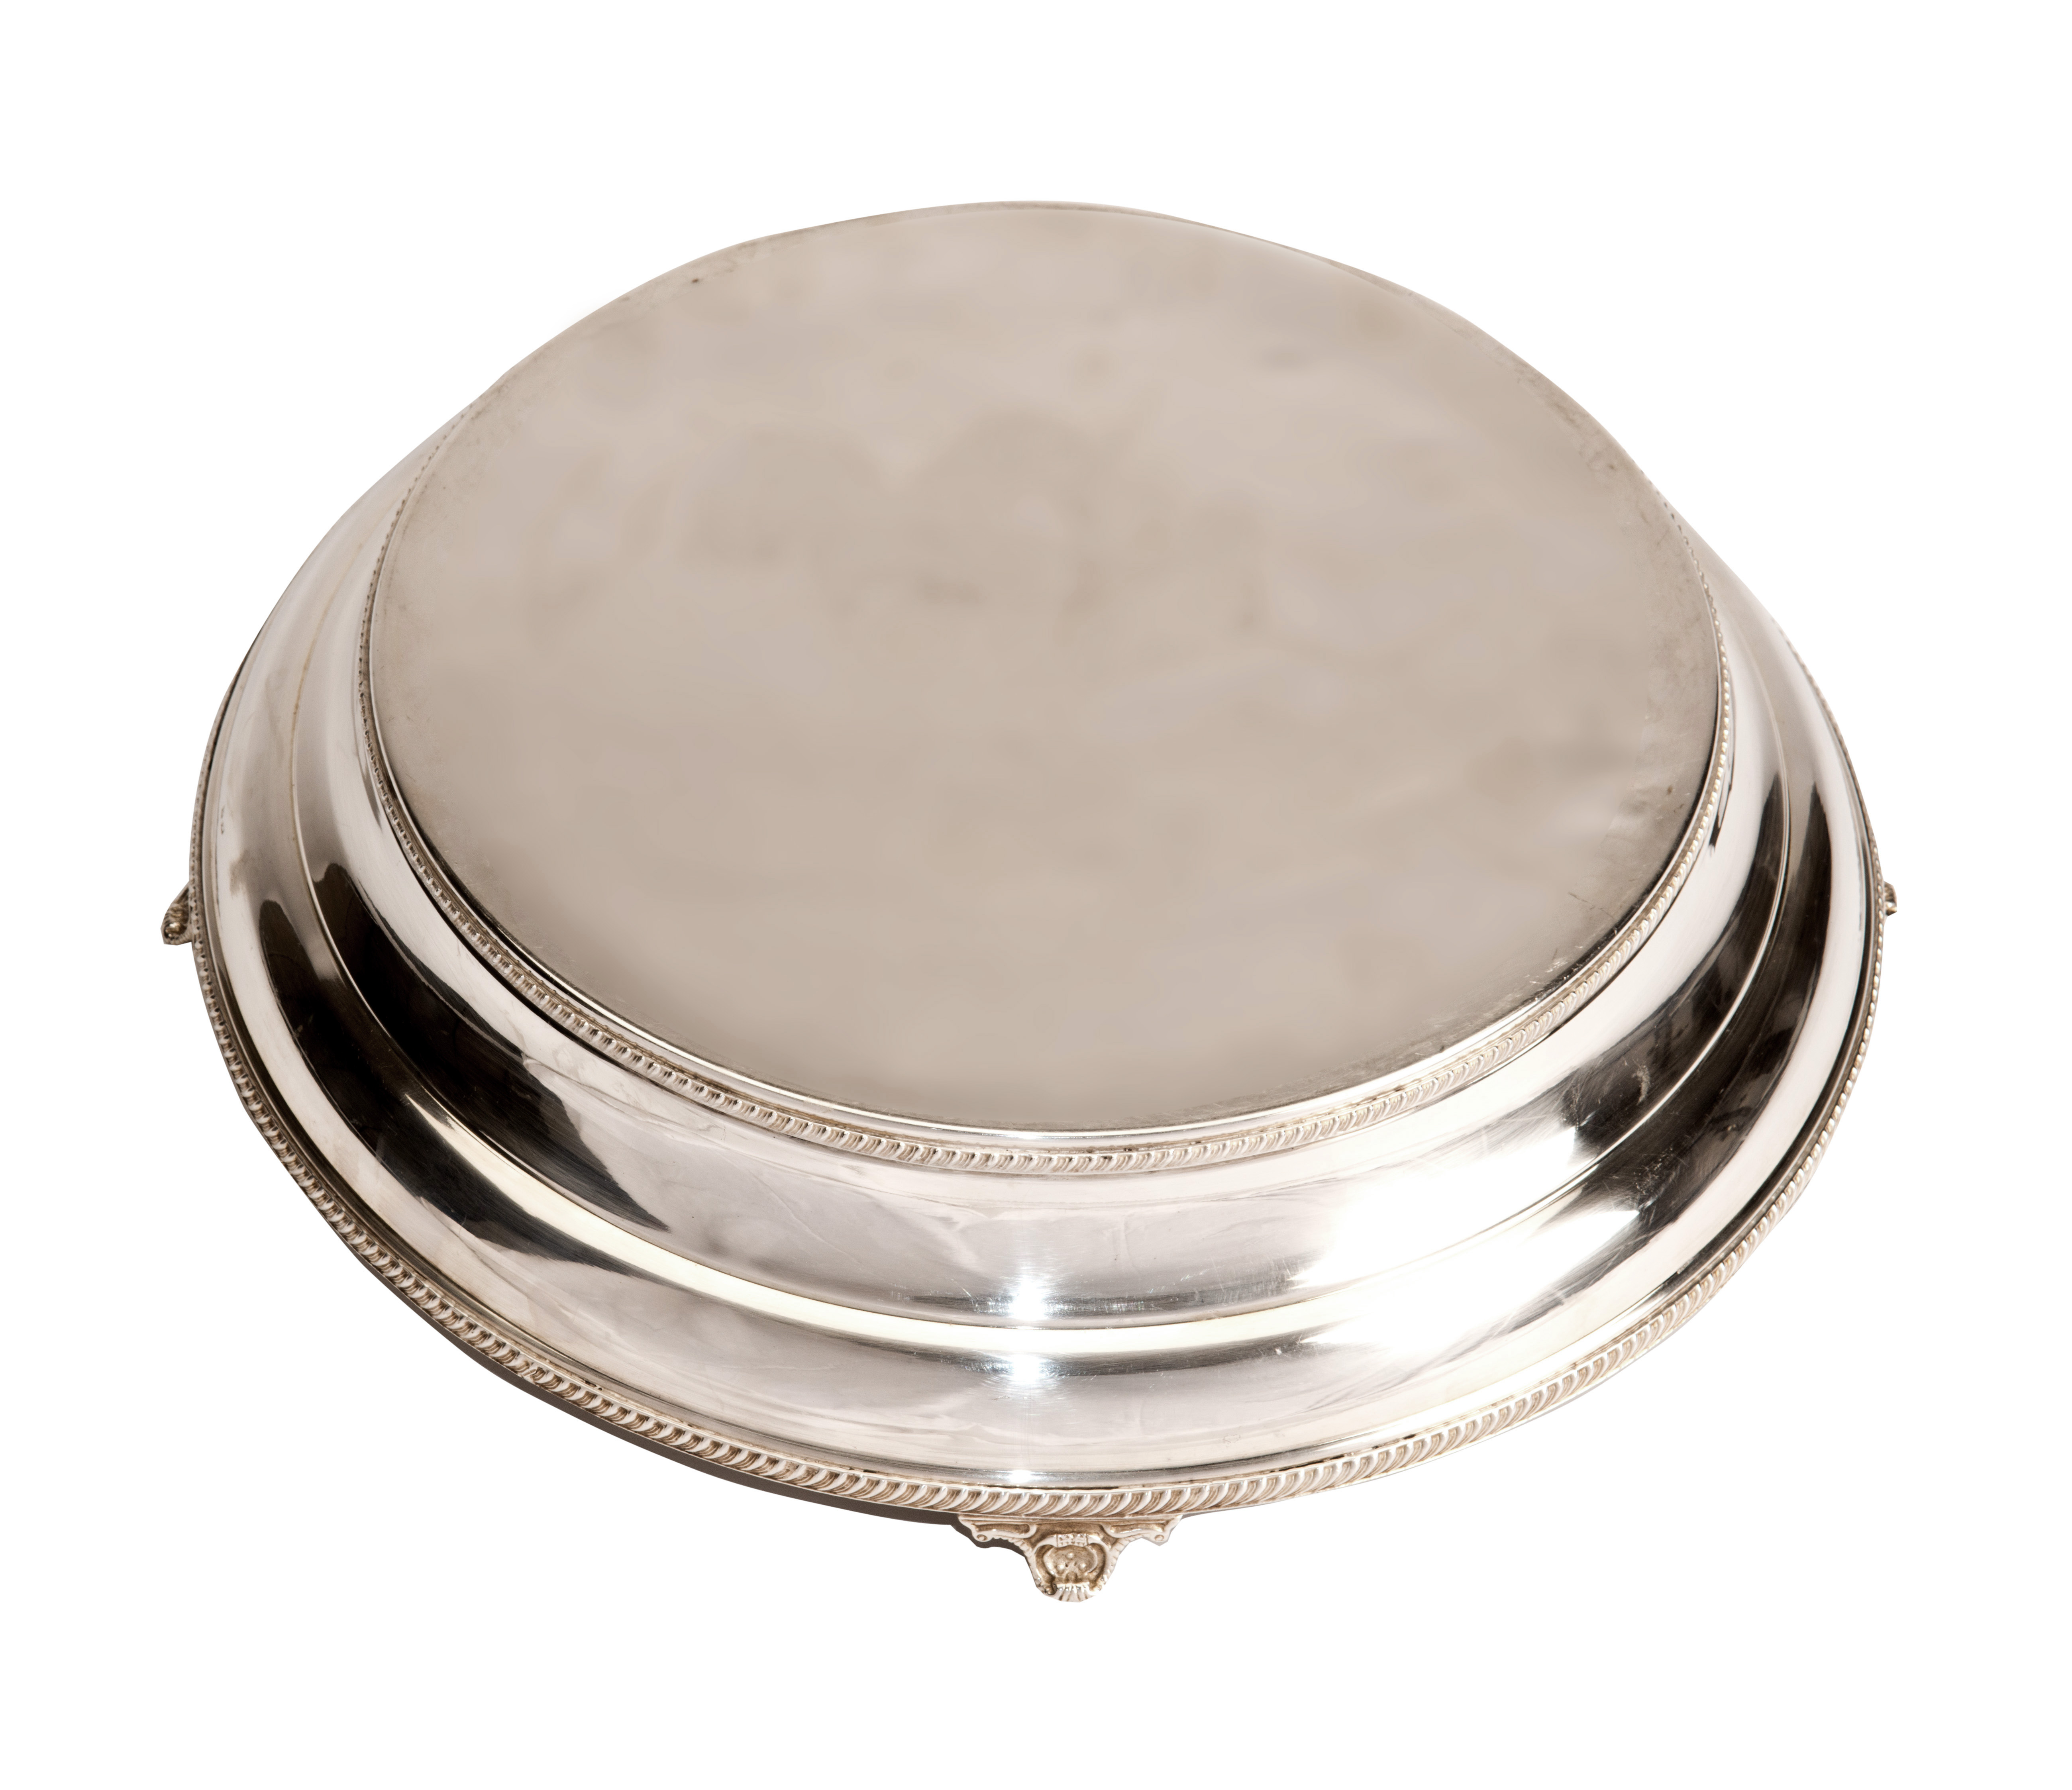 category_T1003 - Cake Stand - Round Silver 16